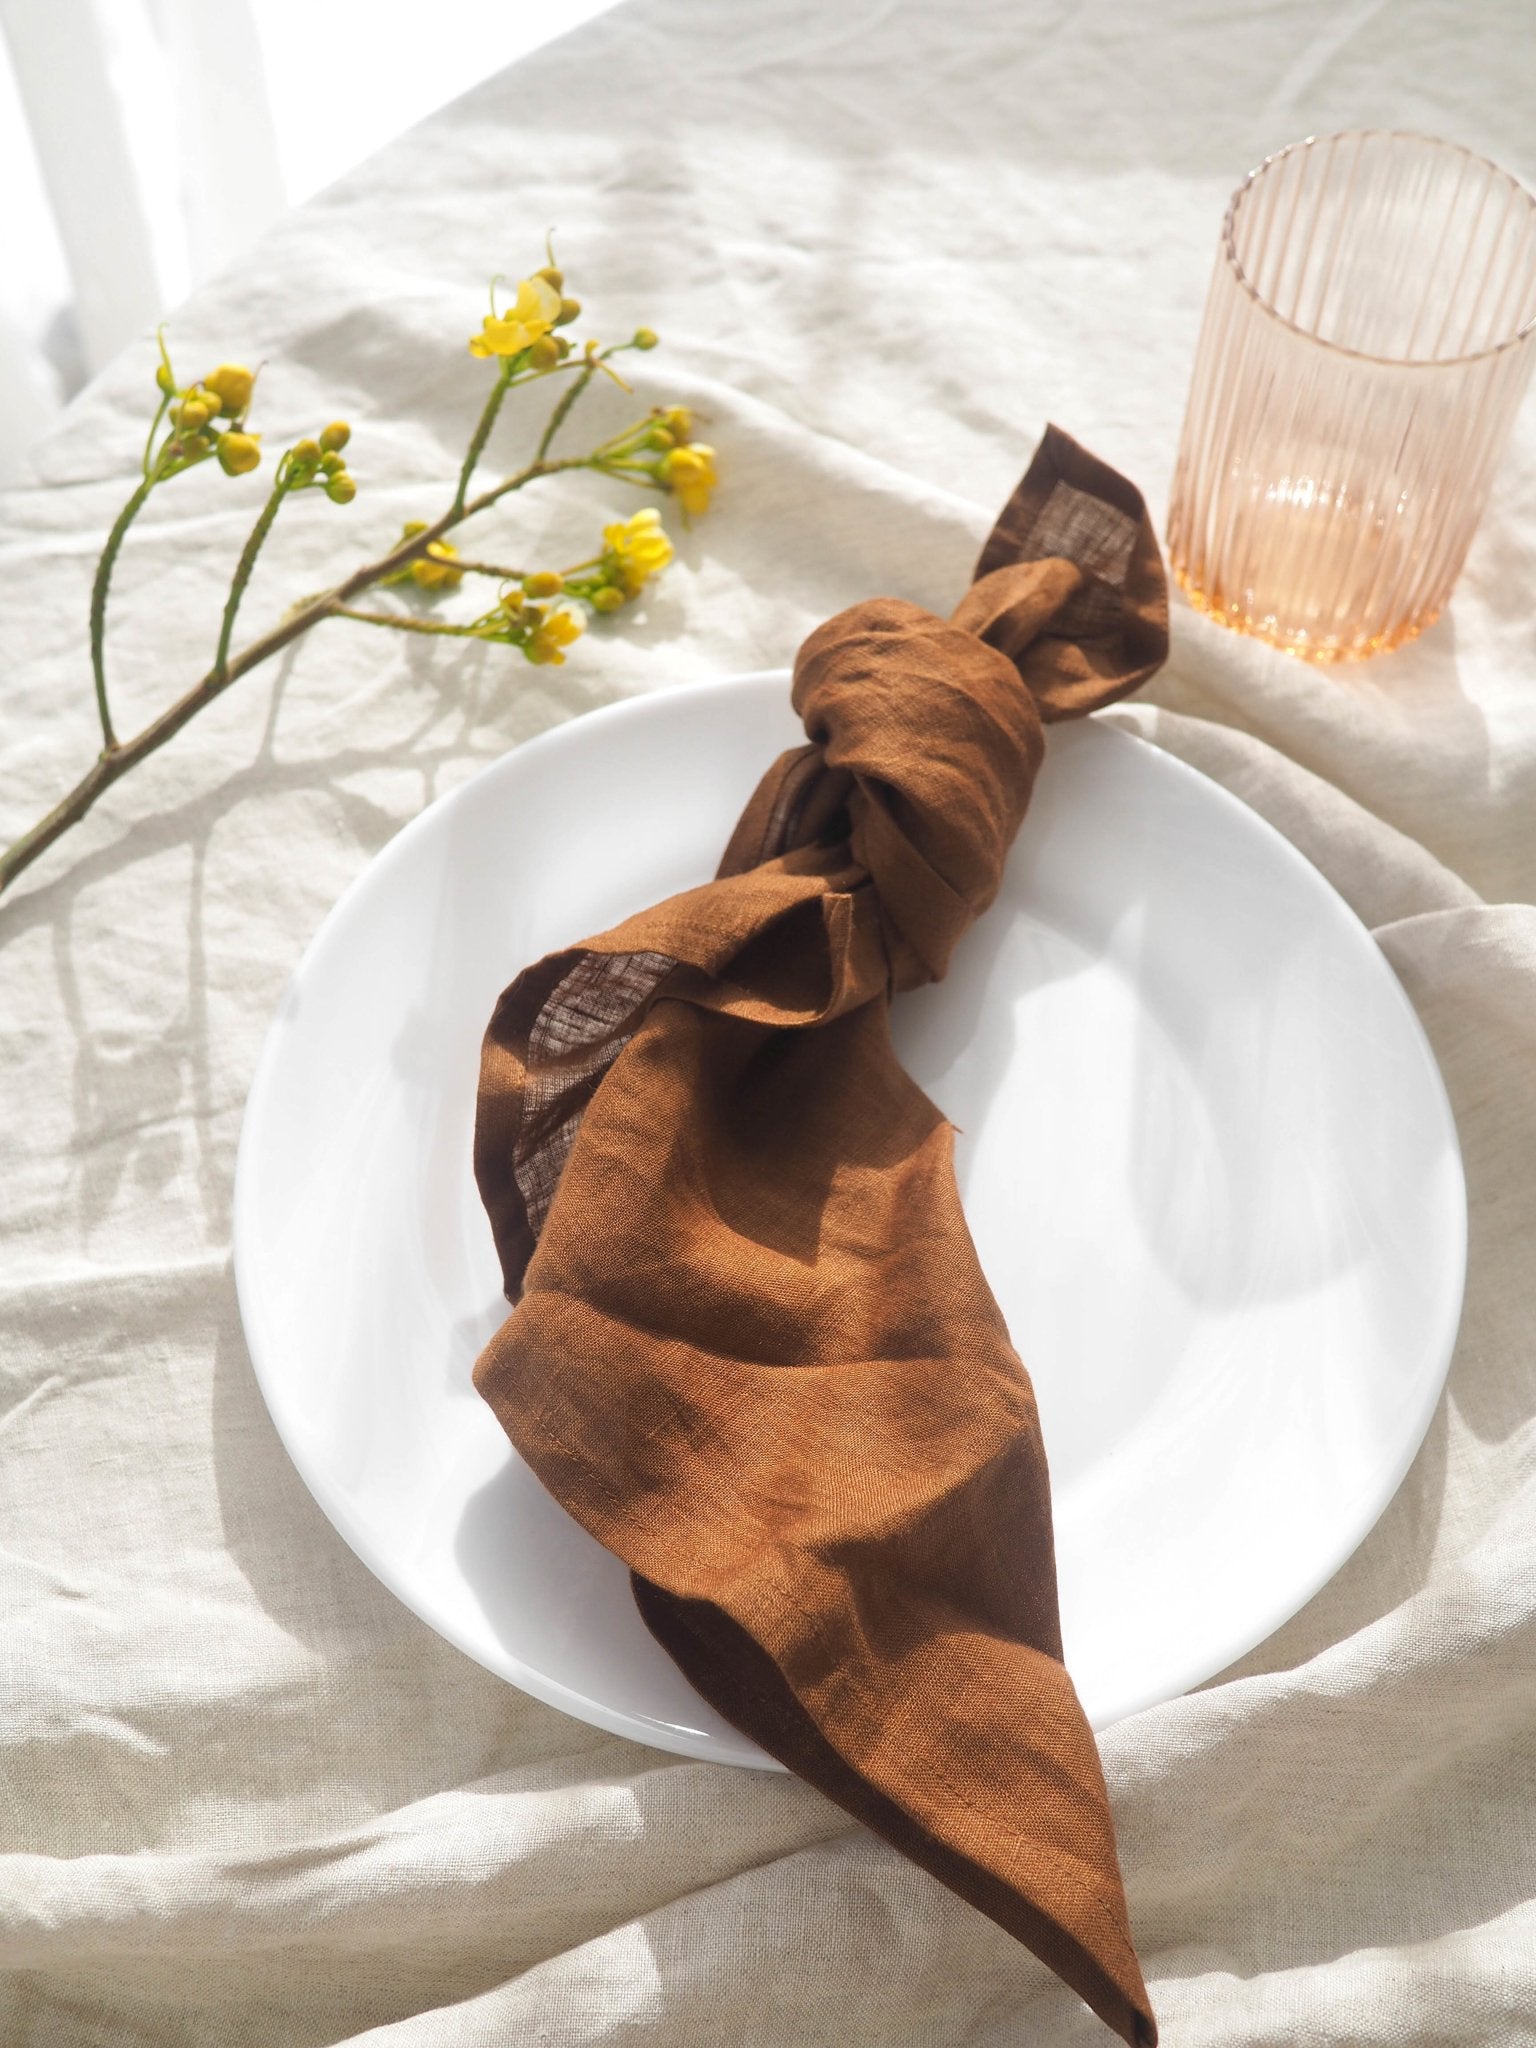 100% Linen Tablecloth - The Sustainable Life